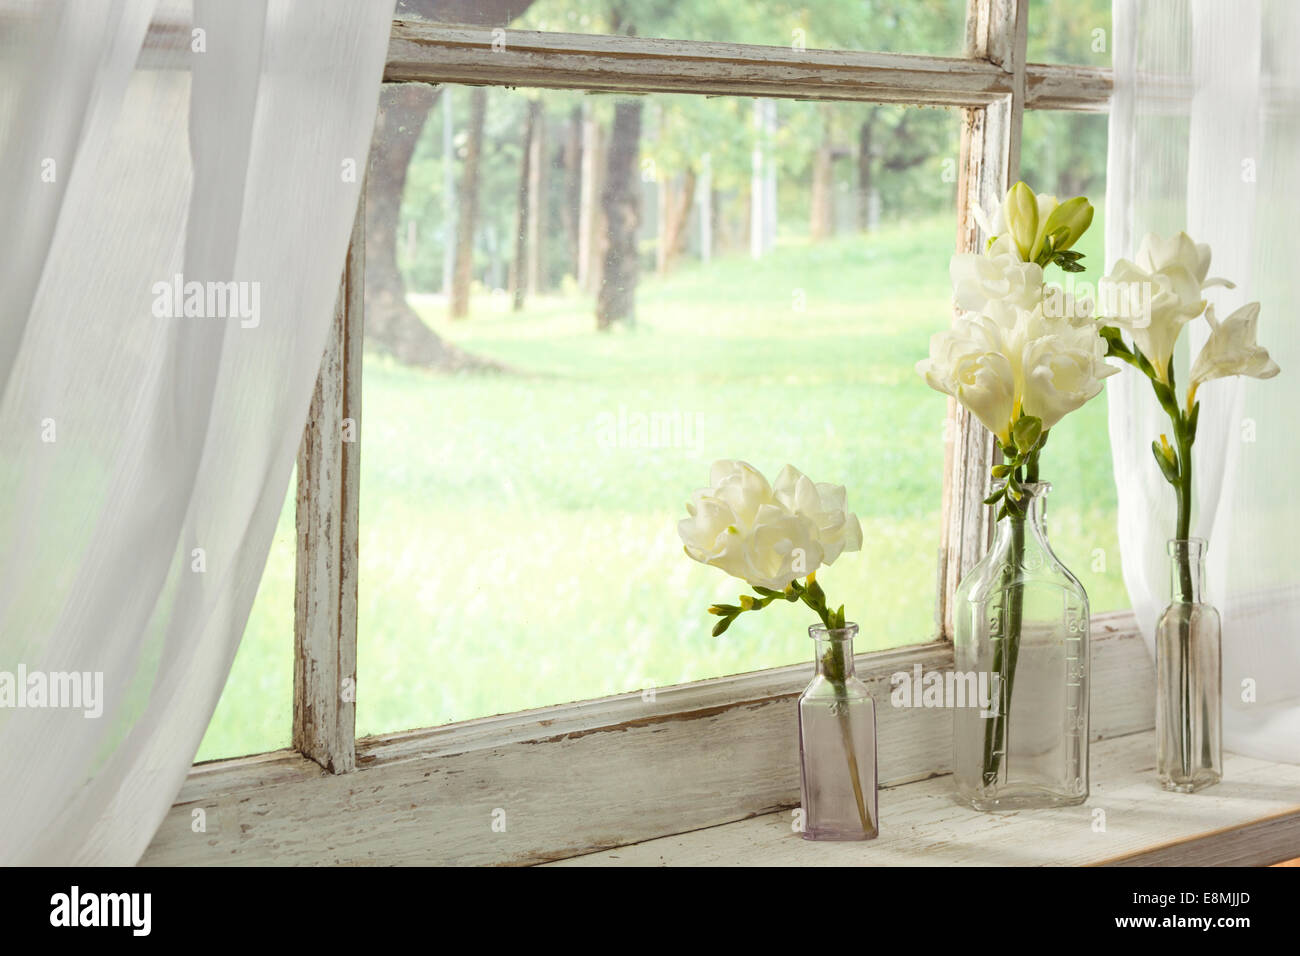 Flowers displayed in an antique bottles sitting on a window sill Stock Photo